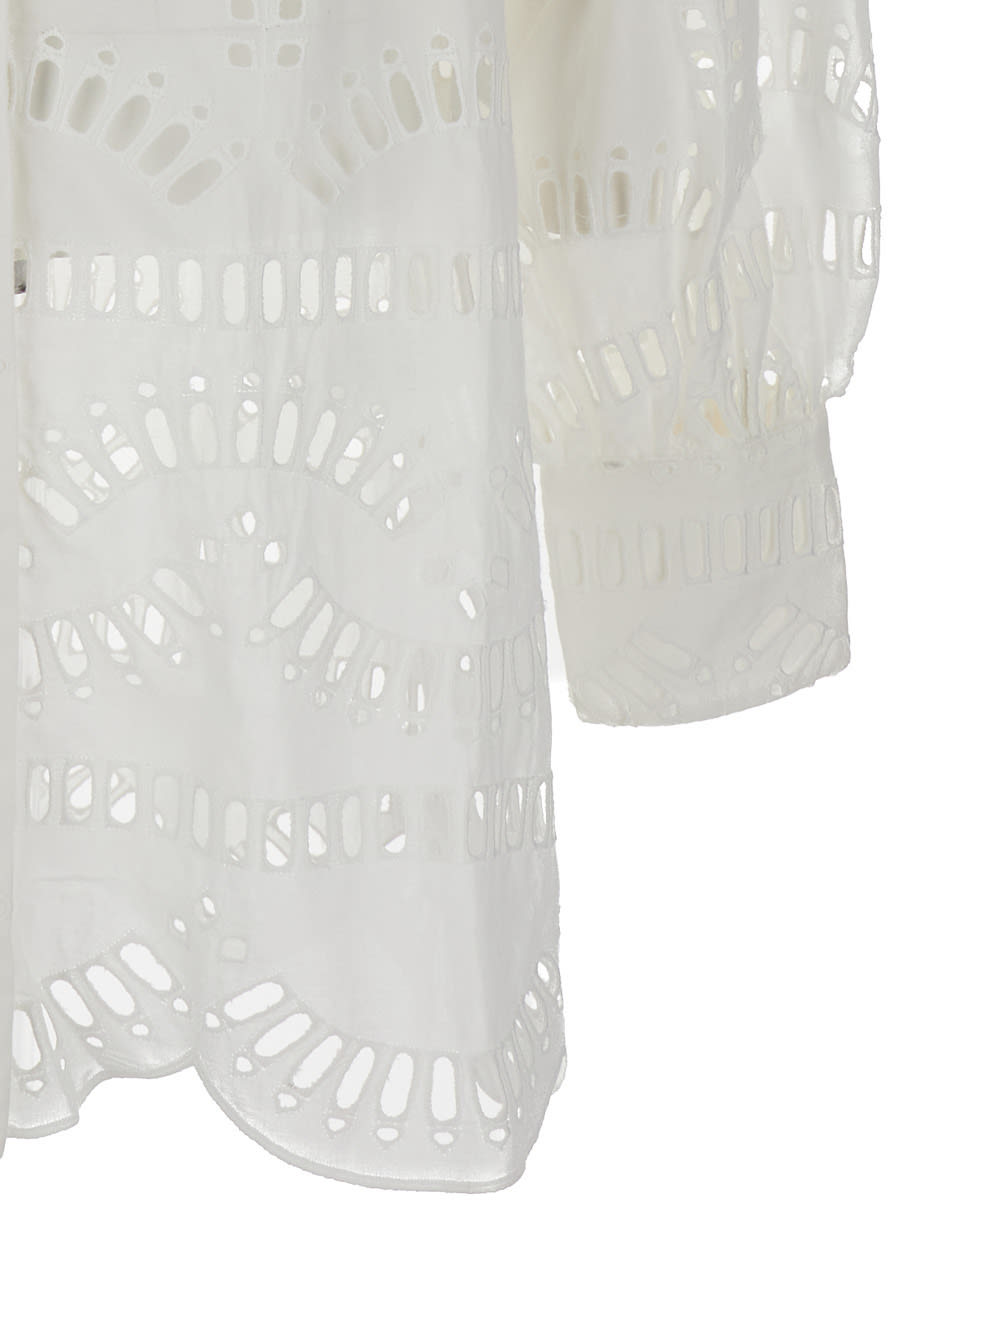 Shop Charo Ruiz White Jeky Blouse With Cut-out Detail In Cotton Woman